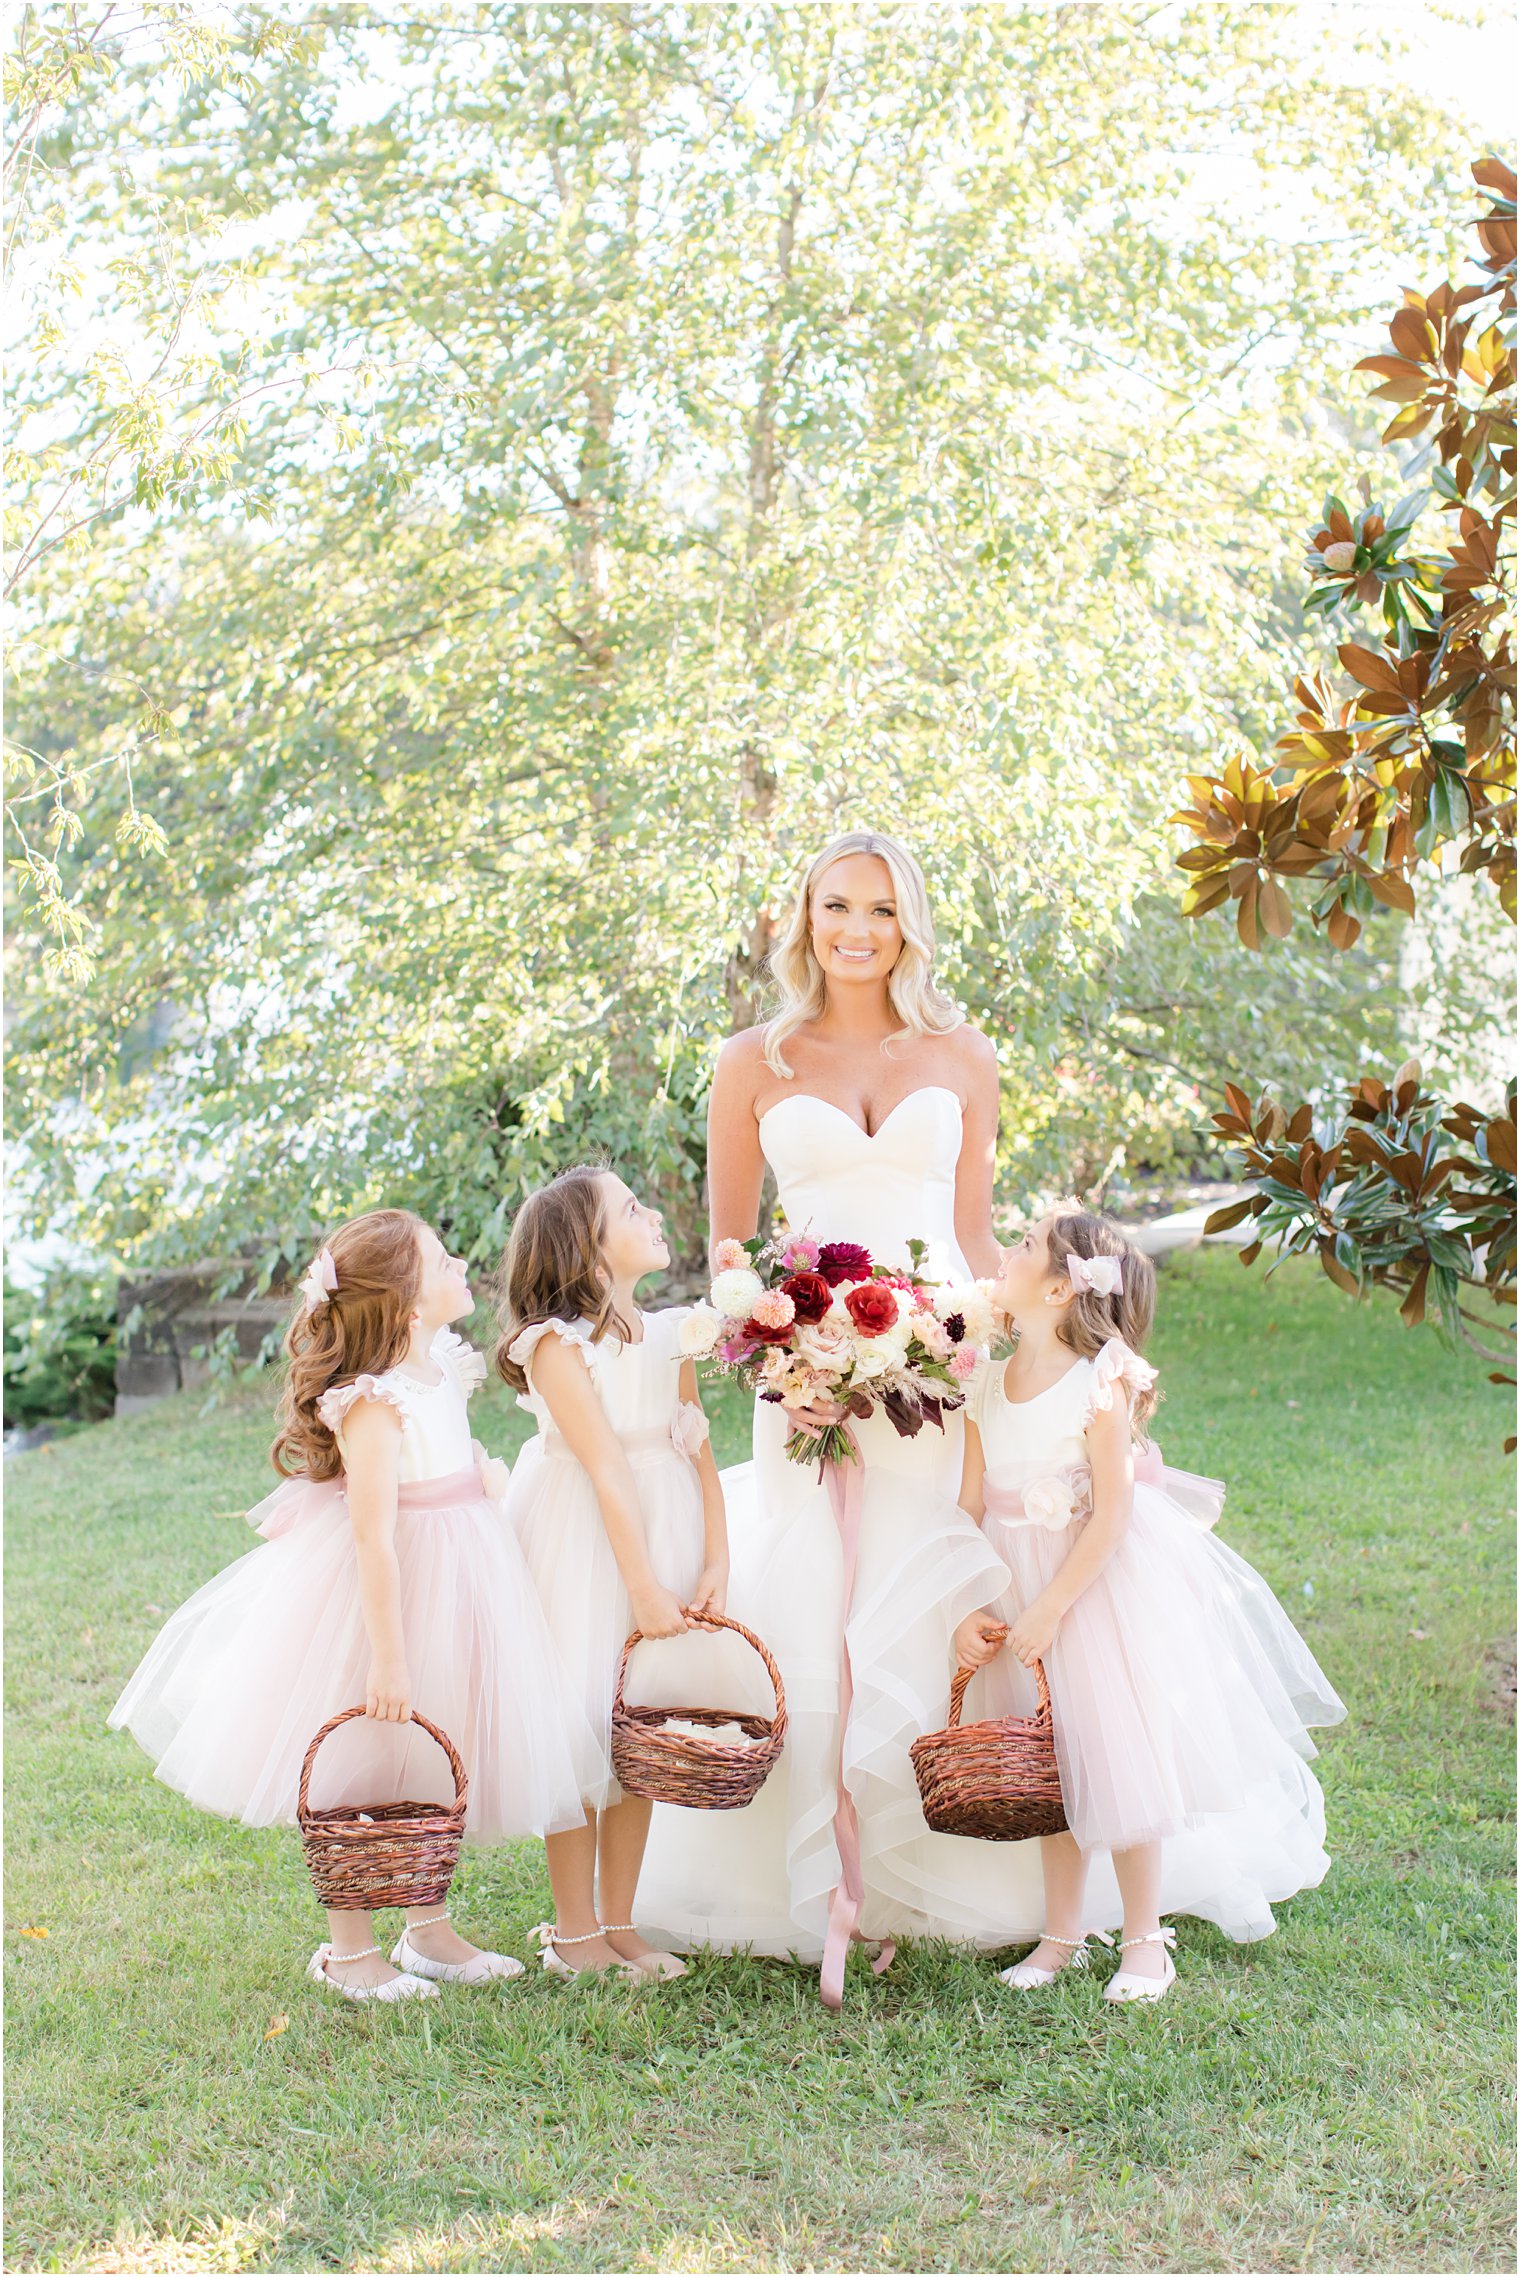 3 flower girls in pink dresses with baskets of flowers look up at bride 